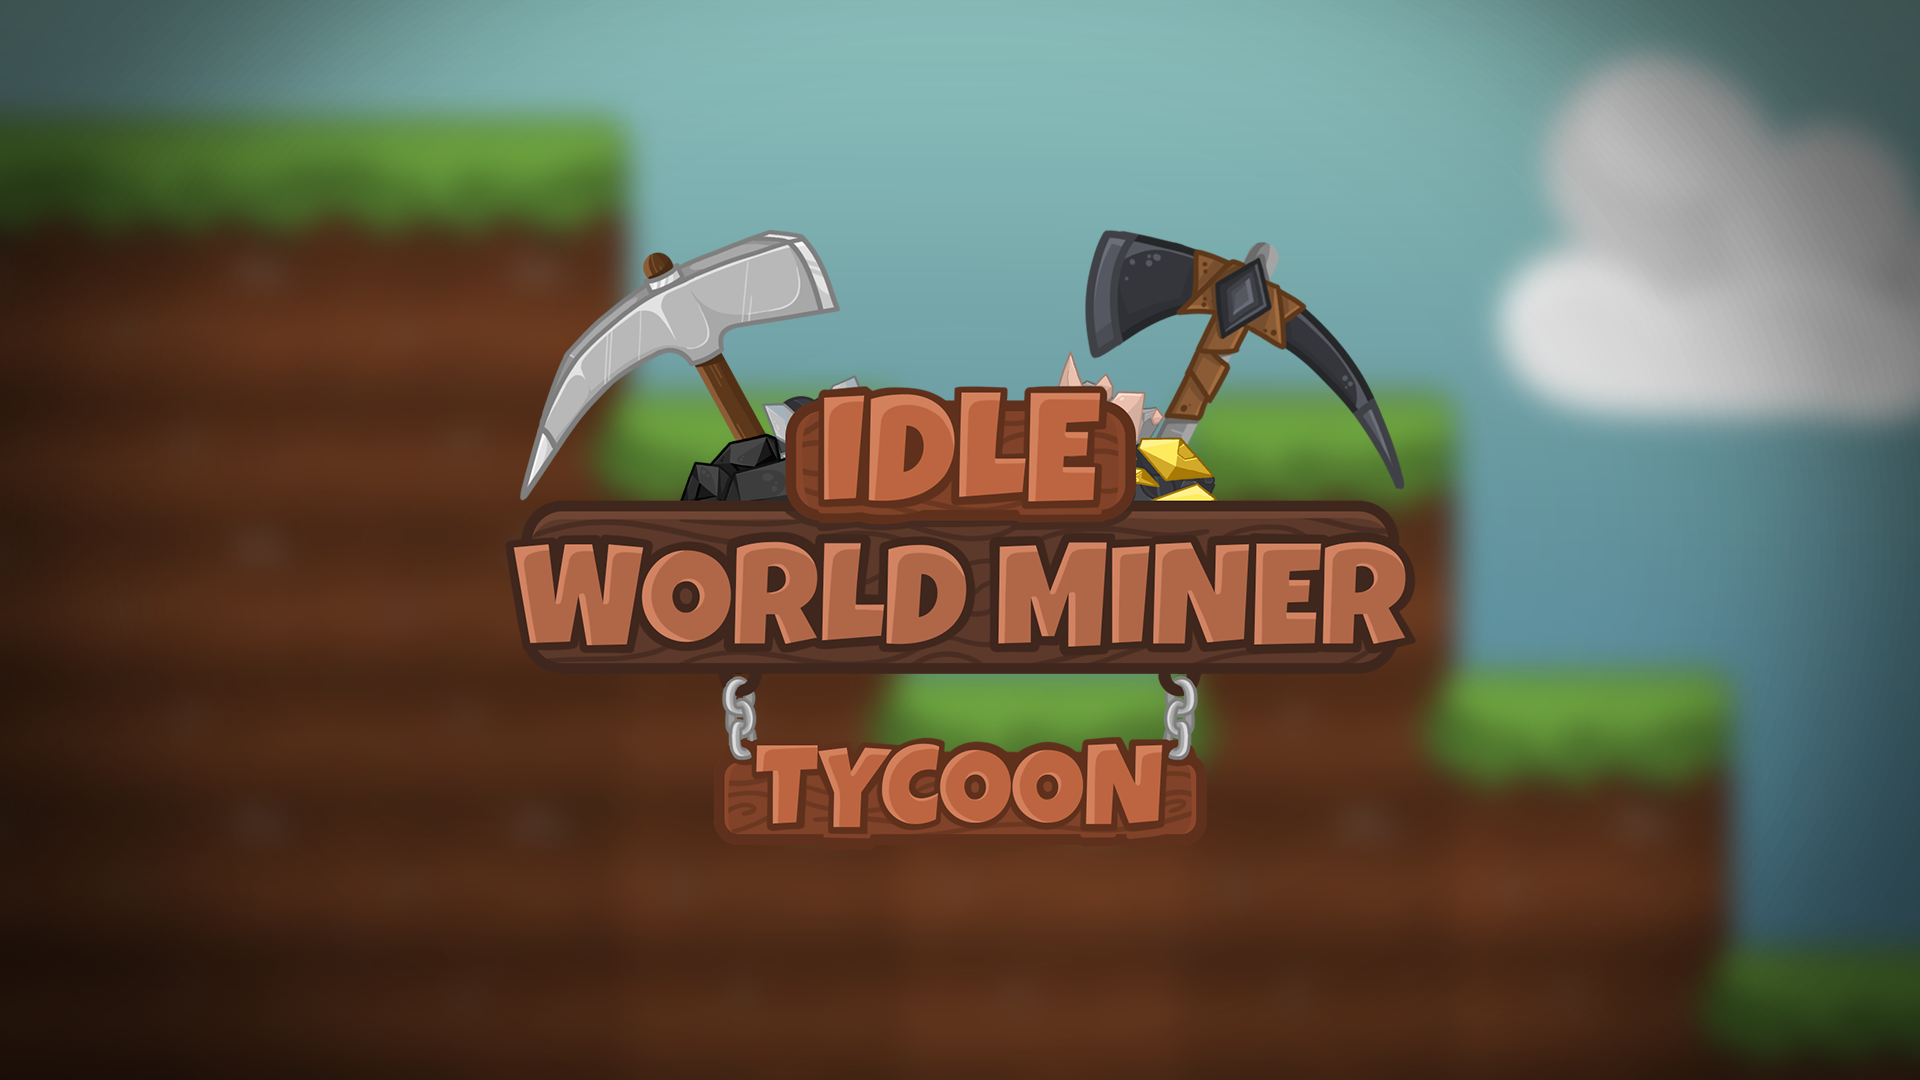 Idle World Miner Tycoon Game Image